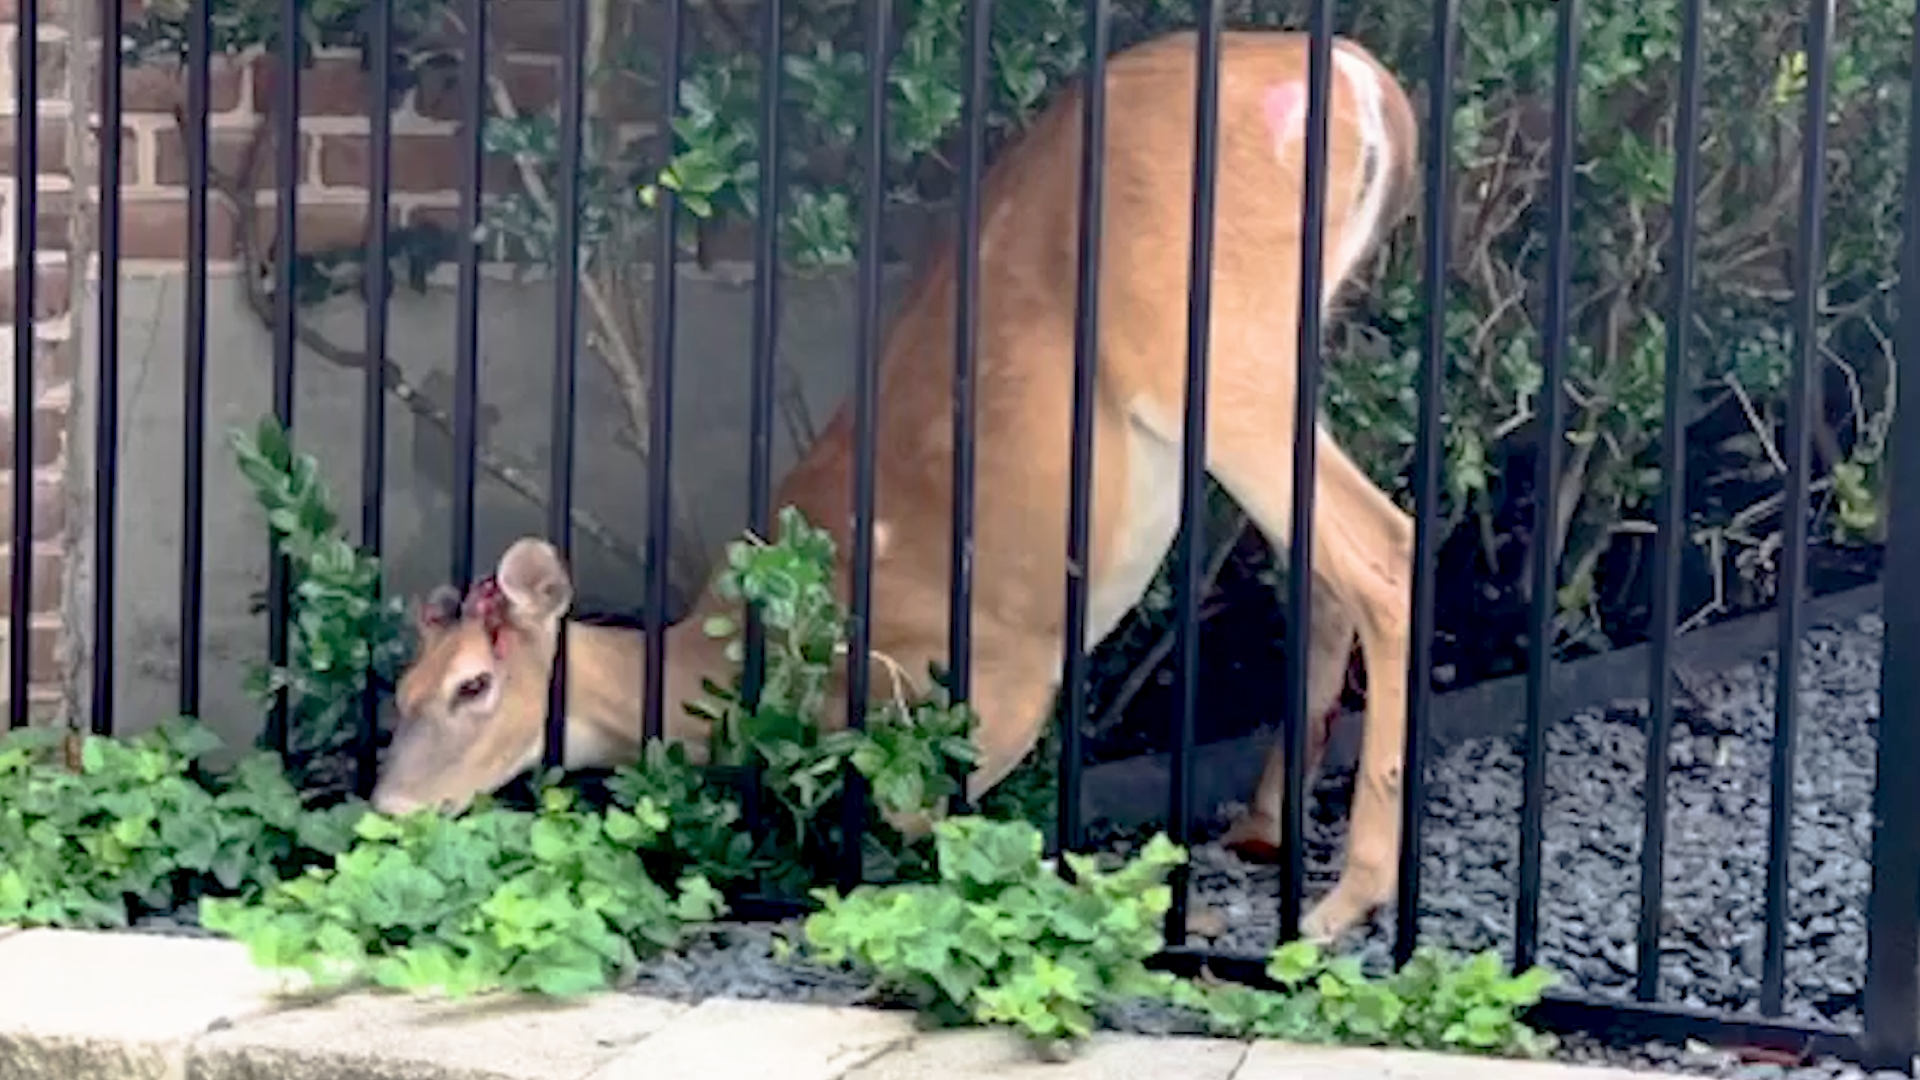 The city of Plano recently released this video showing animal services officers rescuing a deer caught up in an iron fence.